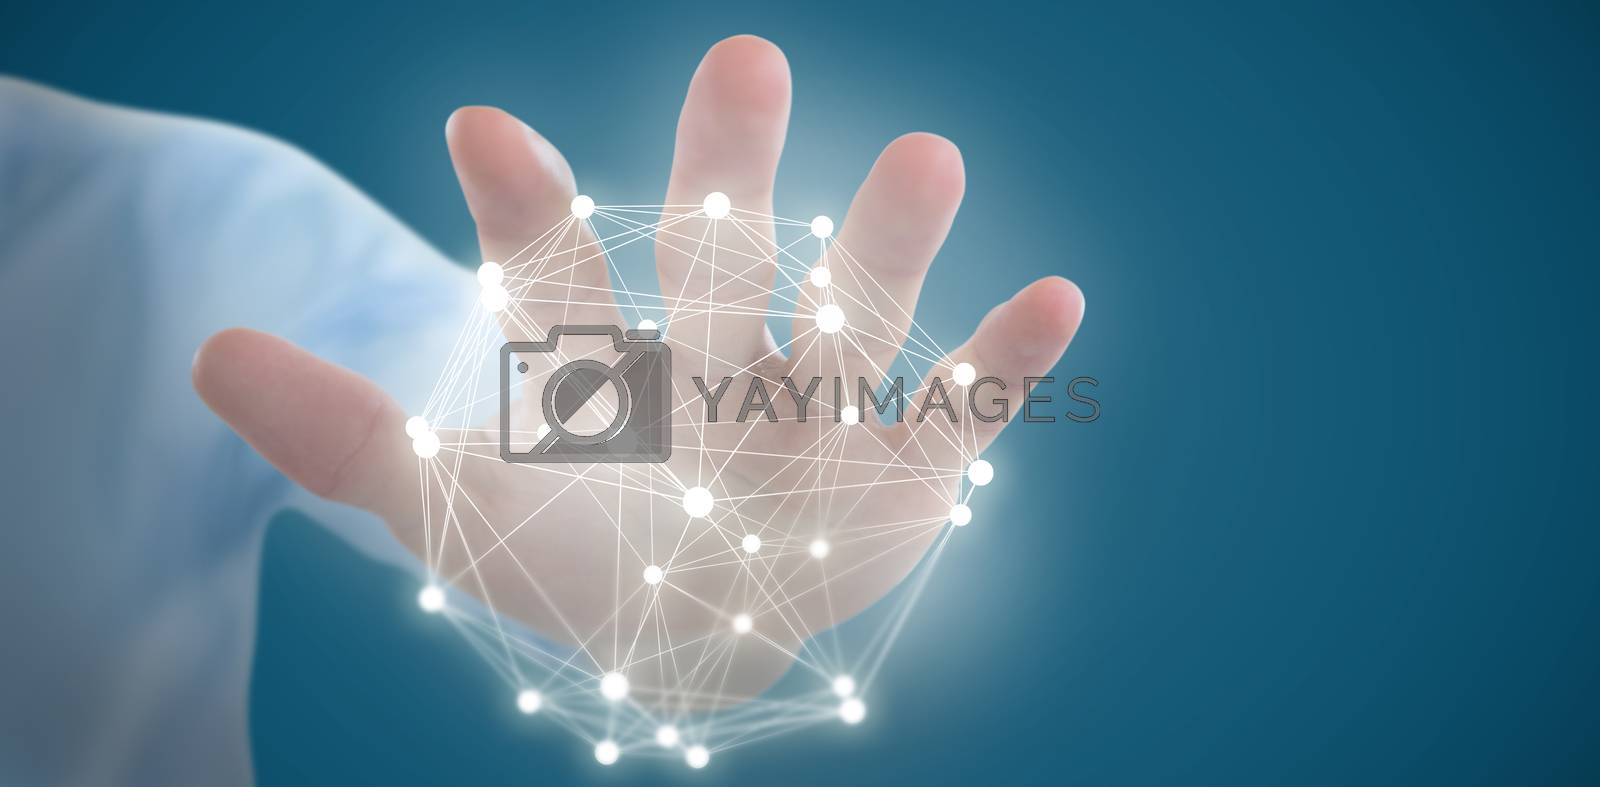 Royalty free image of Composite image of cropped hand of man over invisible screen by Wavebreakmedia